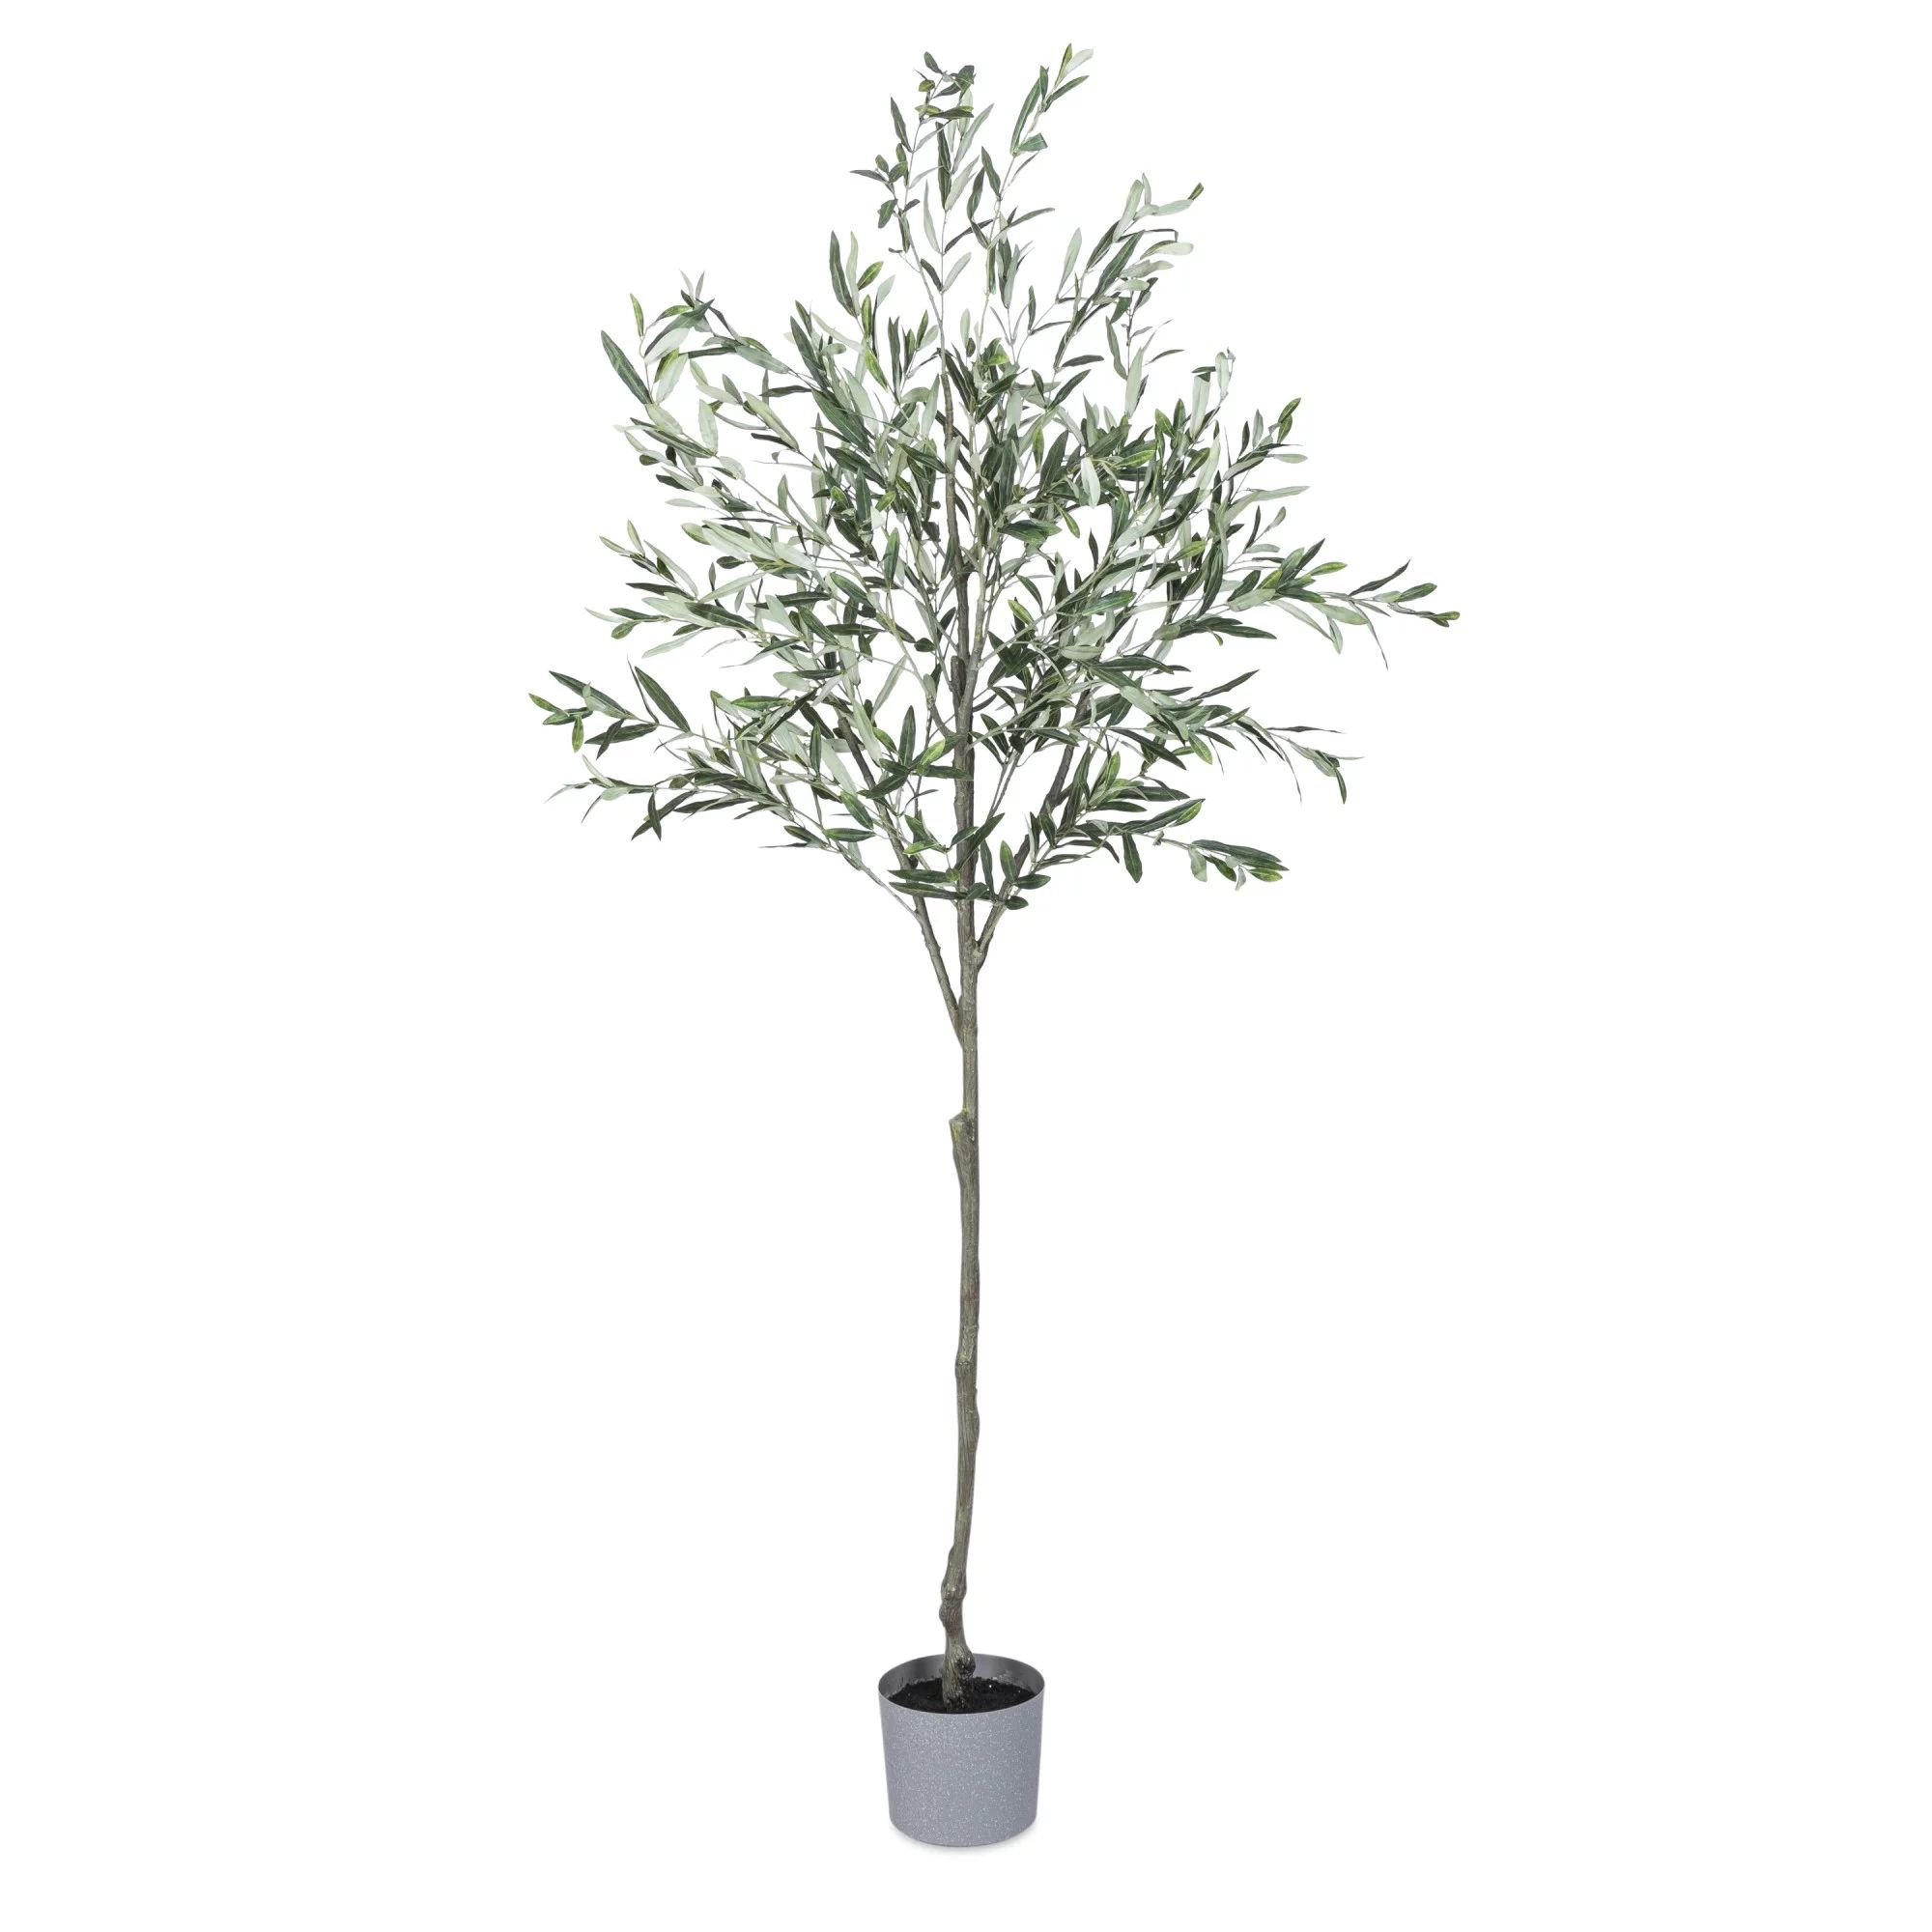 Gerson 7 ft High Olive Tree with Plastic Pot | Walmart (US)